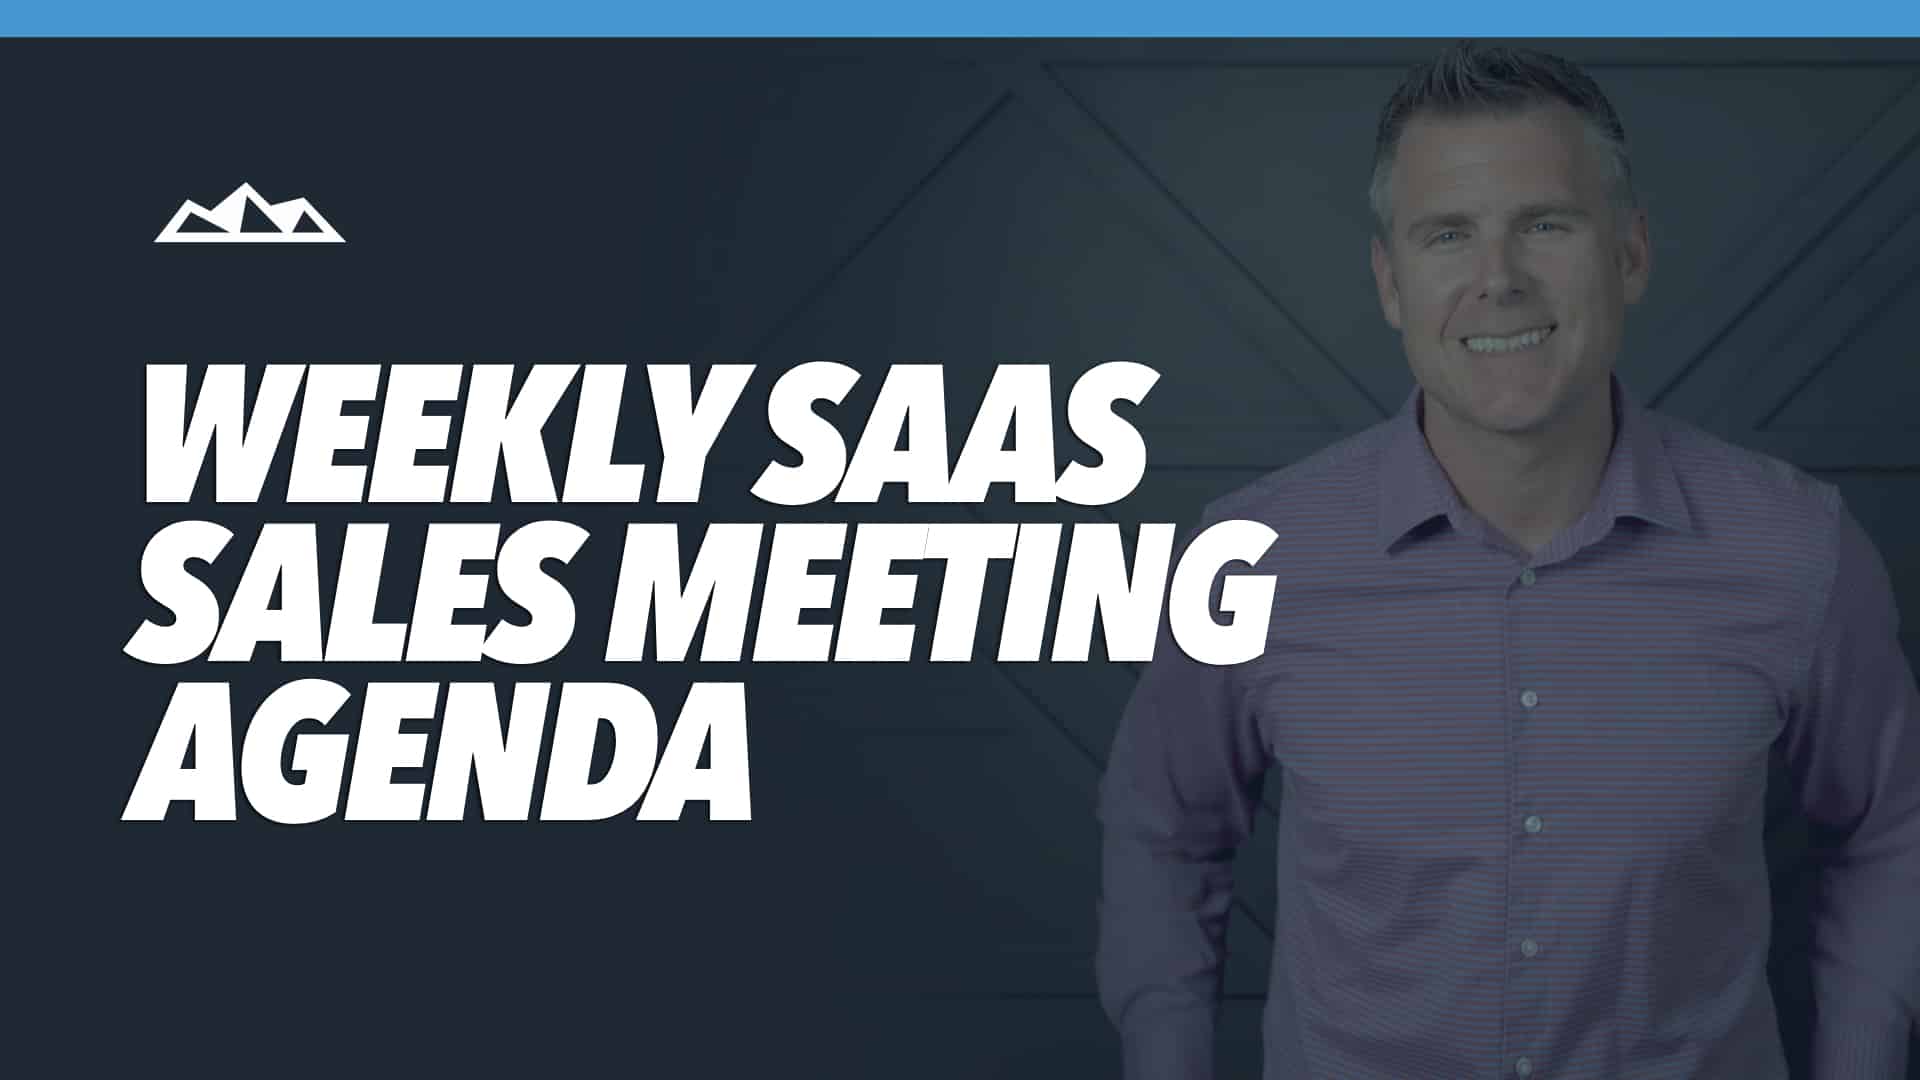 How to Create a Weekly SaaS Sales Team Meeting Agenda That Drives Actual Results